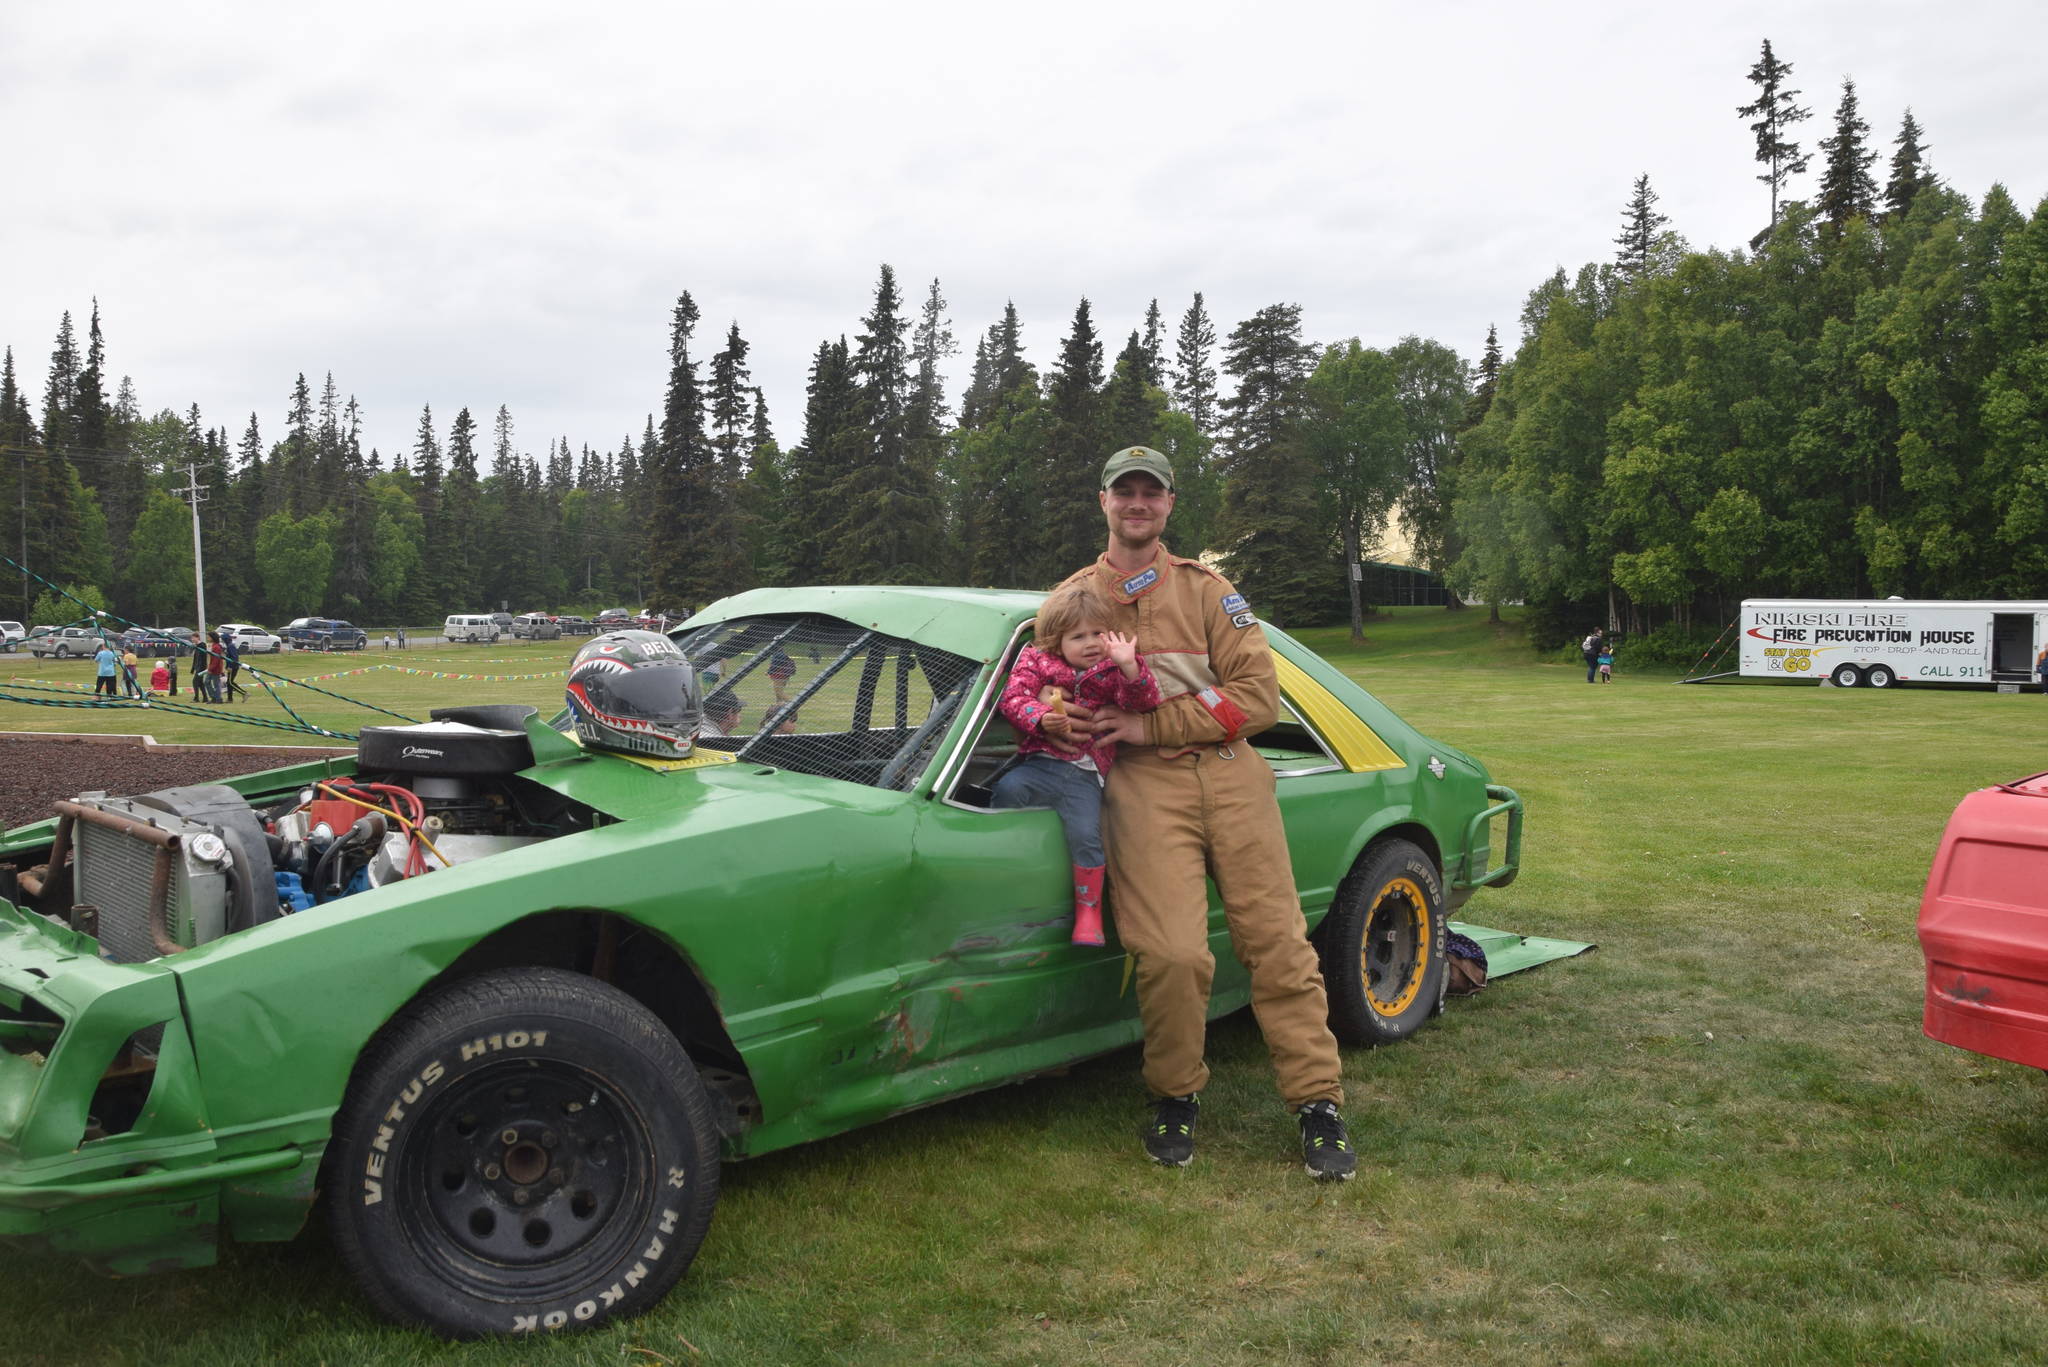 Dawson Hermanns and his daughter, Clara, pose with Hermann’s ‘84 Mustang during the Family Fun in the Midnight Sun festival at the North Peninsula Recreation Center in Nikiski, Alaska on June 15, 2019. (Photo by Brian Mazurek/Peninsula Clarion)